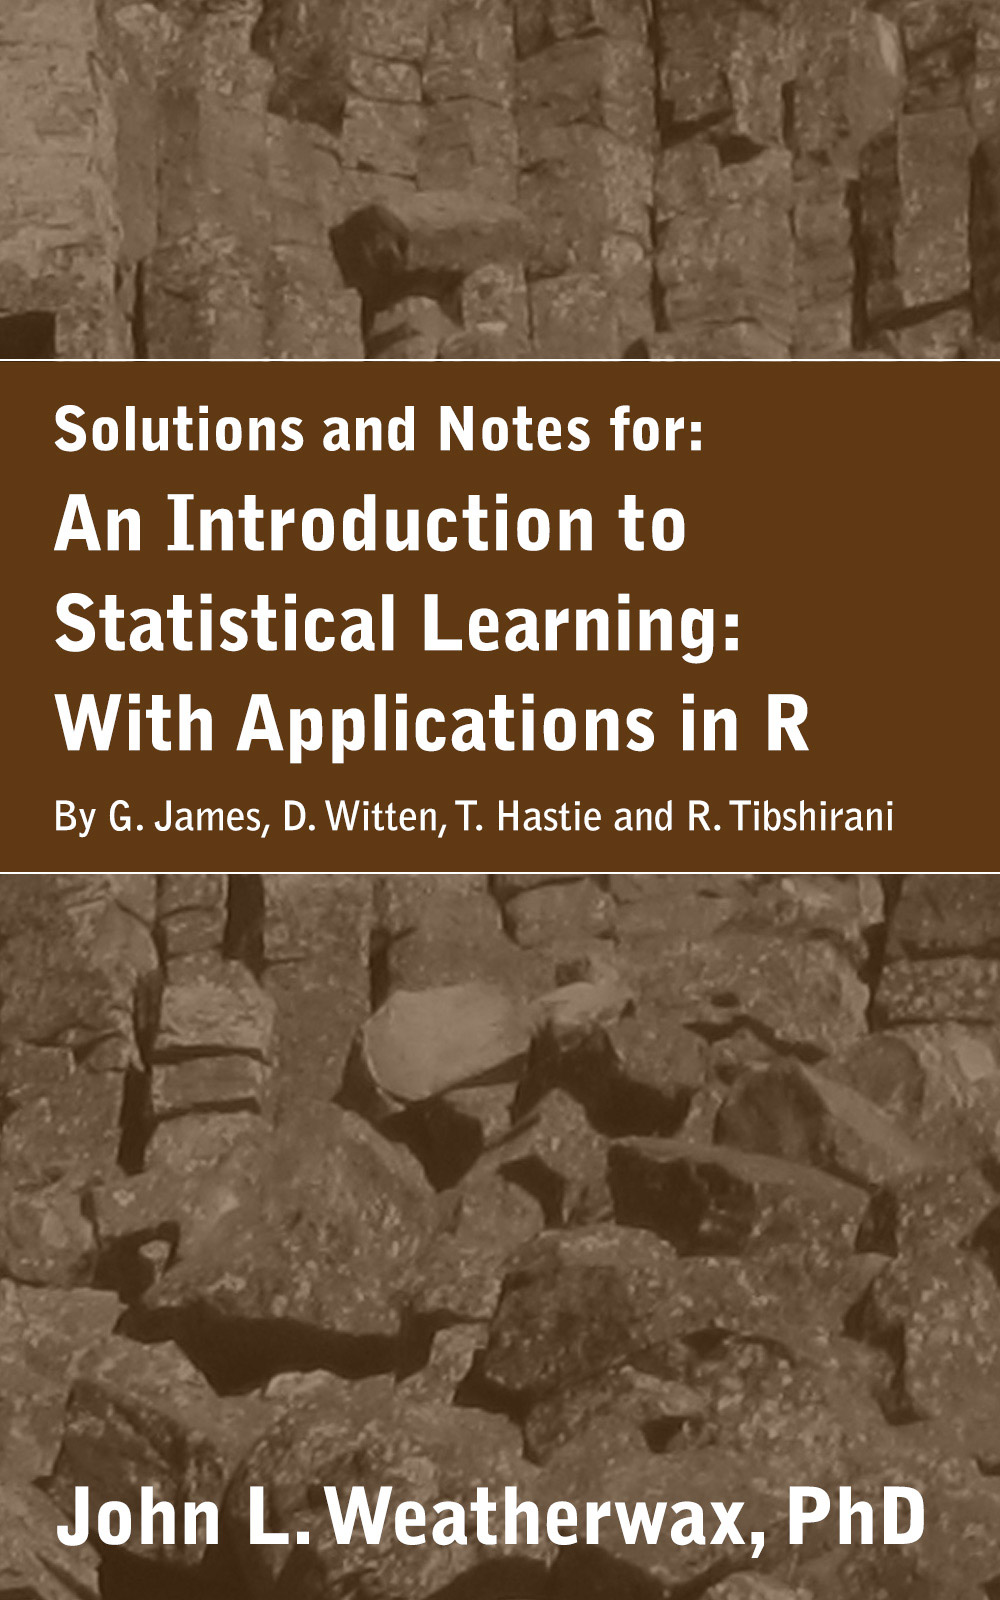 Solutions and Notes for: An Introduction to Satistical Learning: With Applications in R